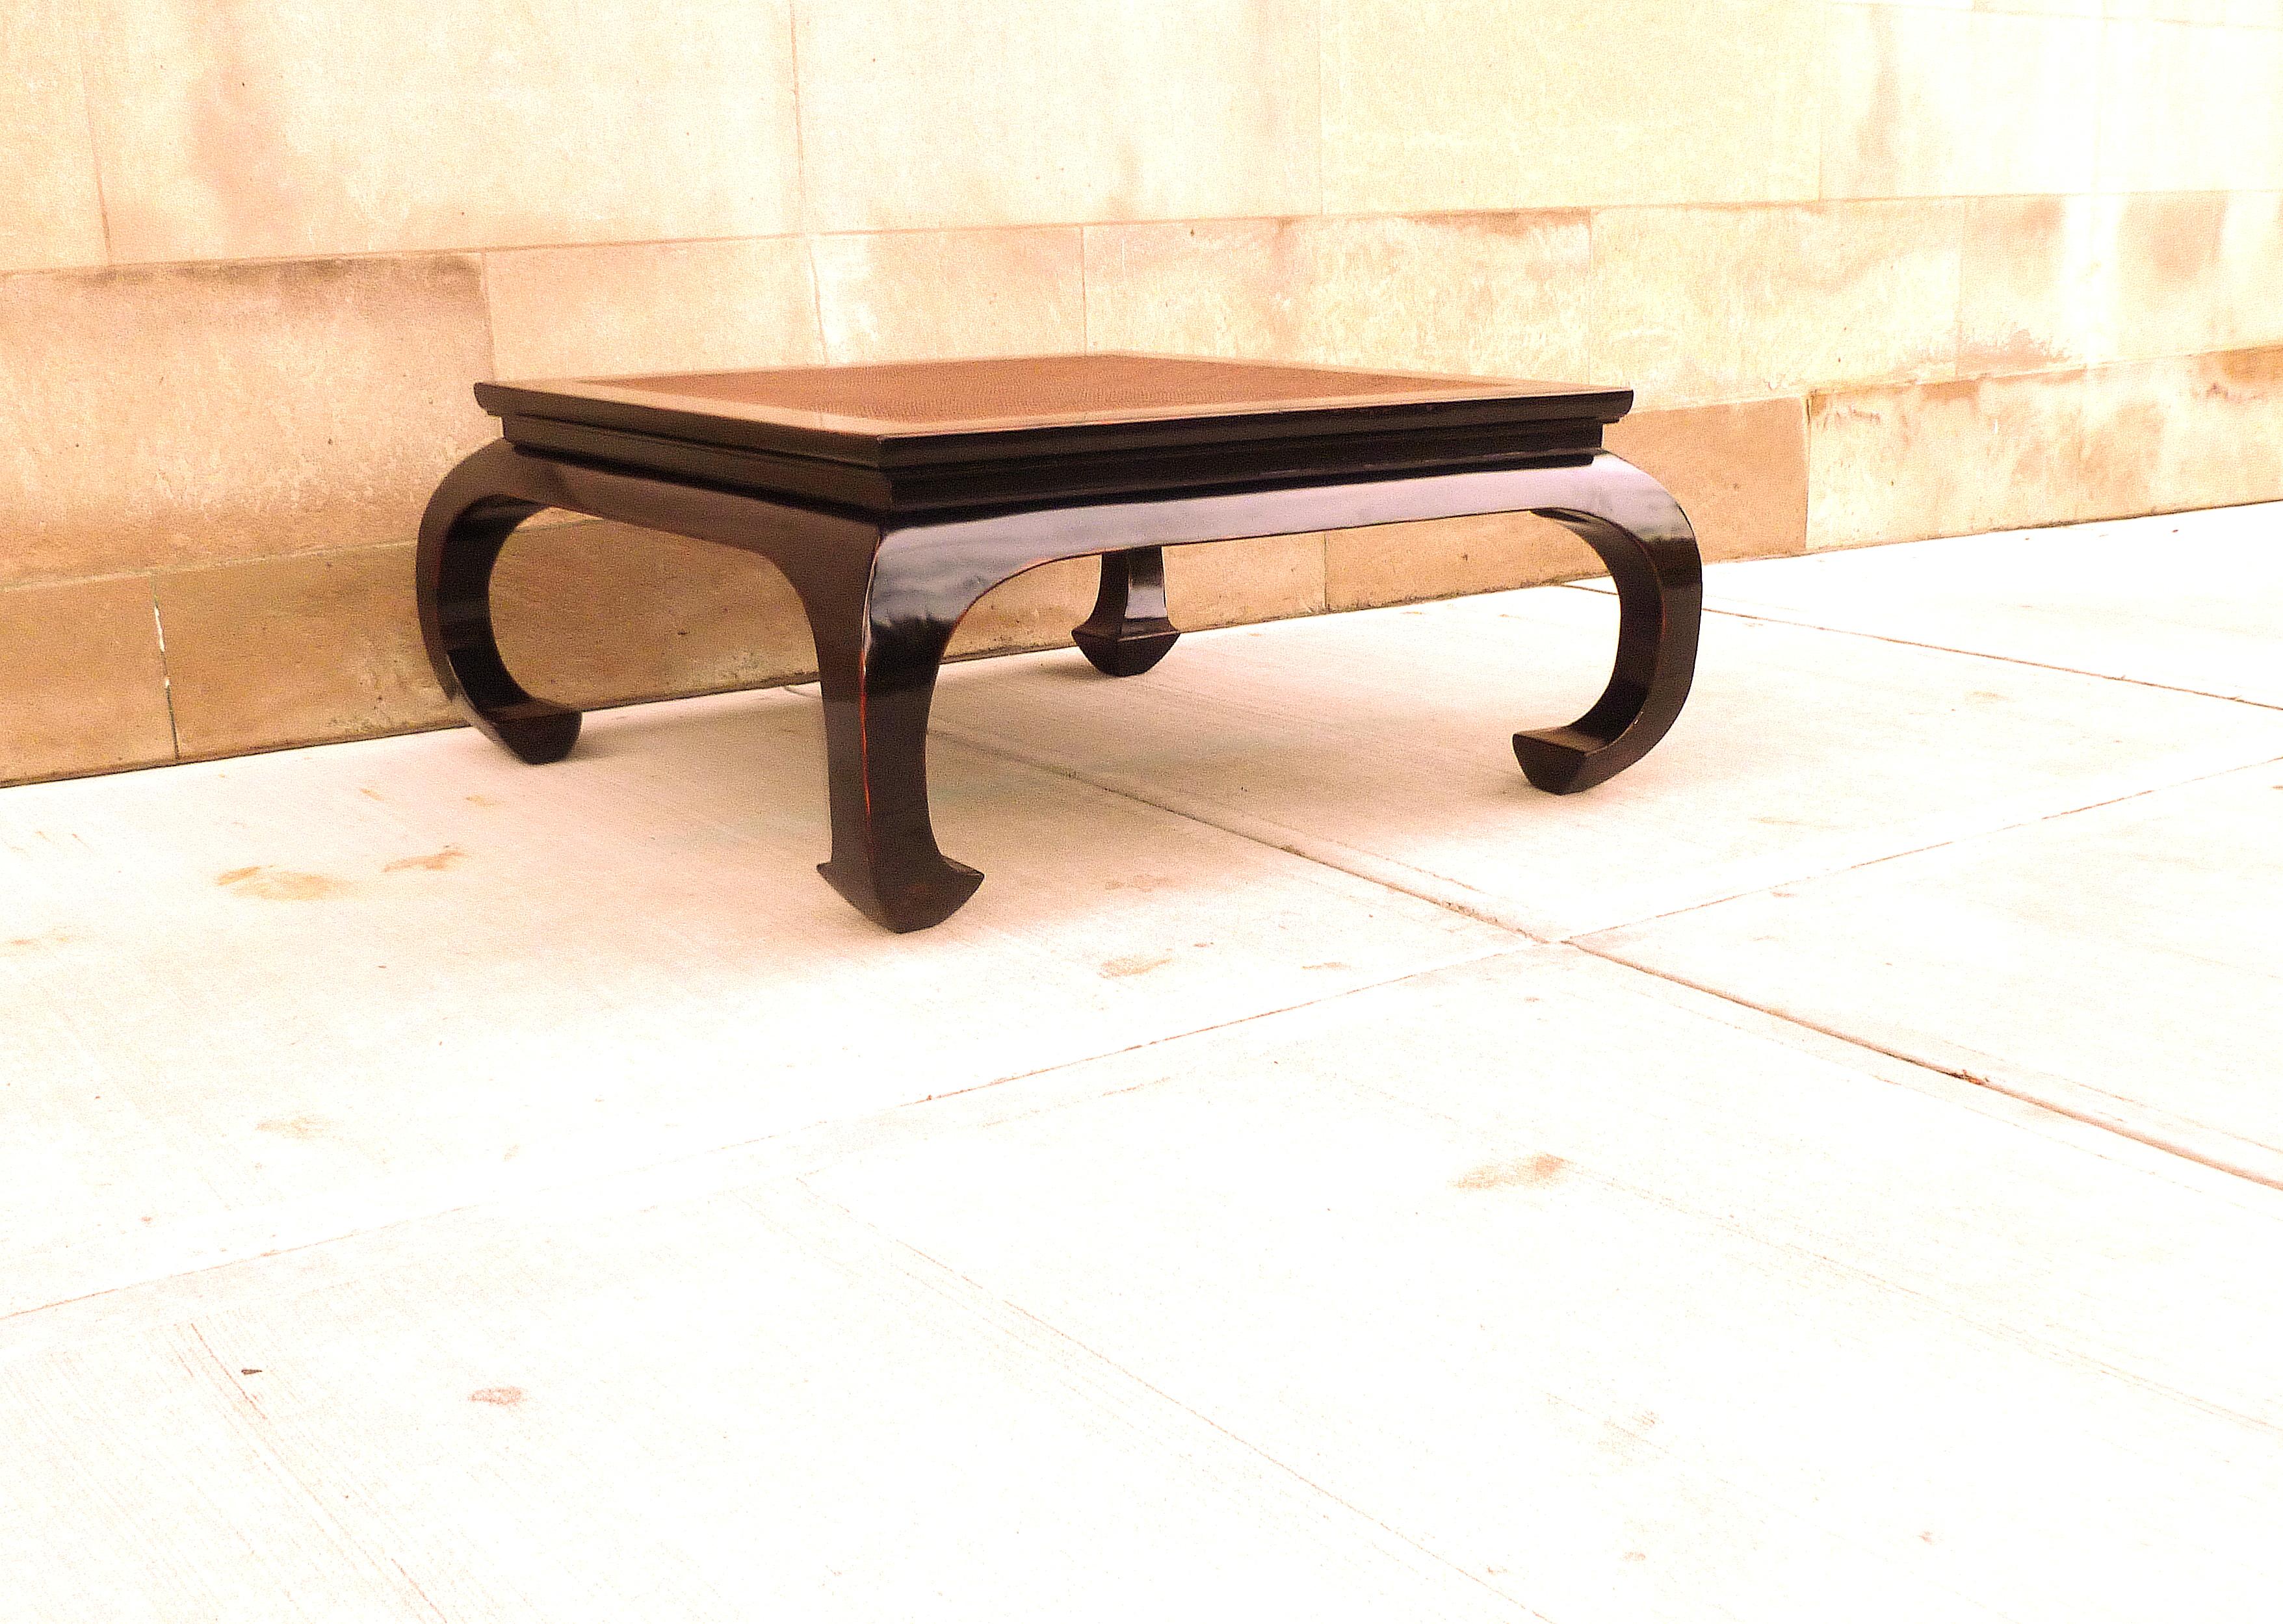 Refined black lacquer square low table with framed hard cane top and curve legs, beautiful color, texture and lines. We carry fine quality furniture with elegant finished and has been appeared many times in 